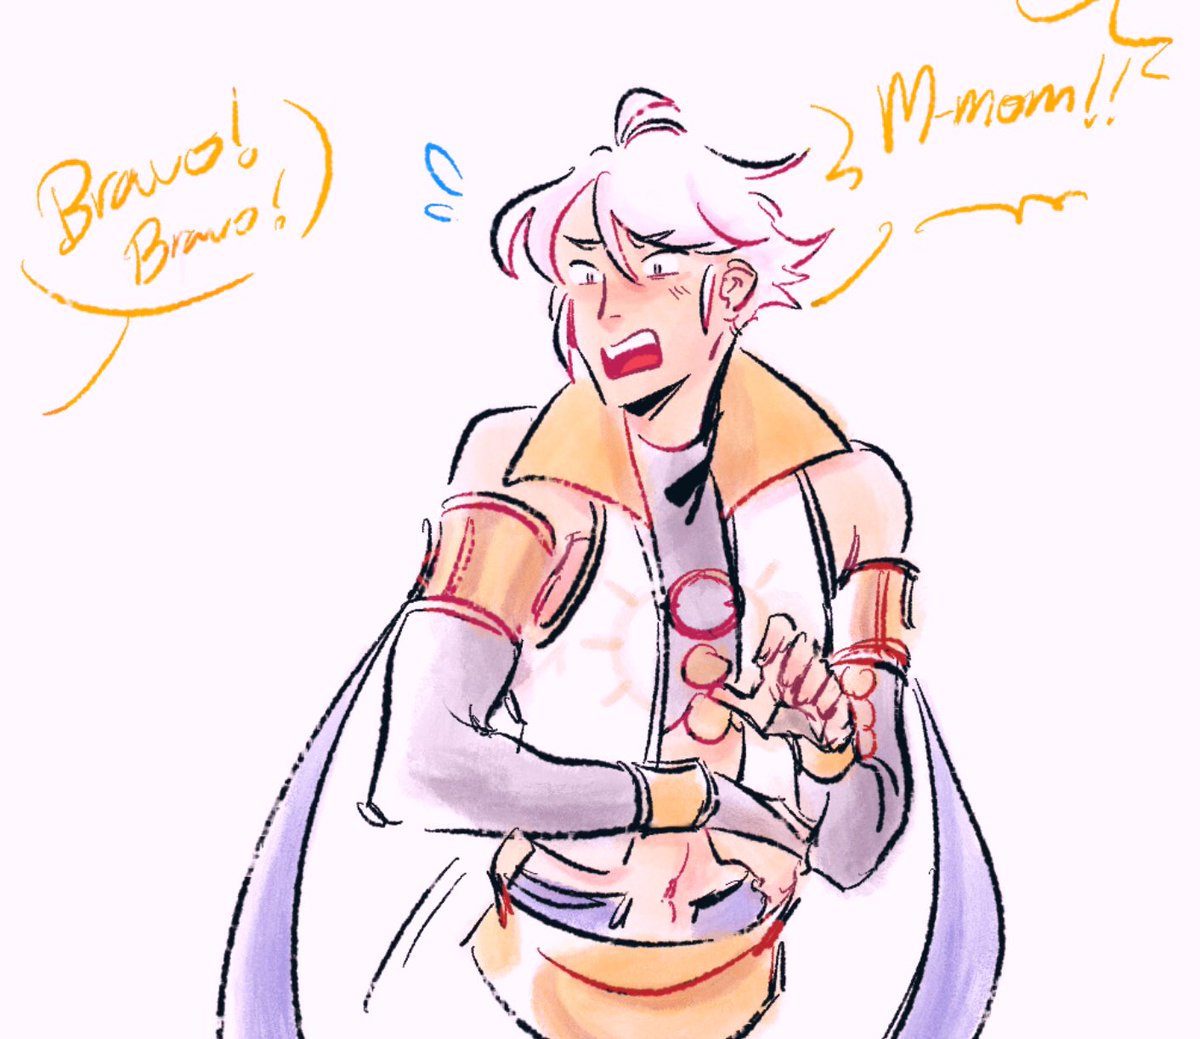 Testing out procreate by embarrassing Inigo- sweetie just let them support u!! 